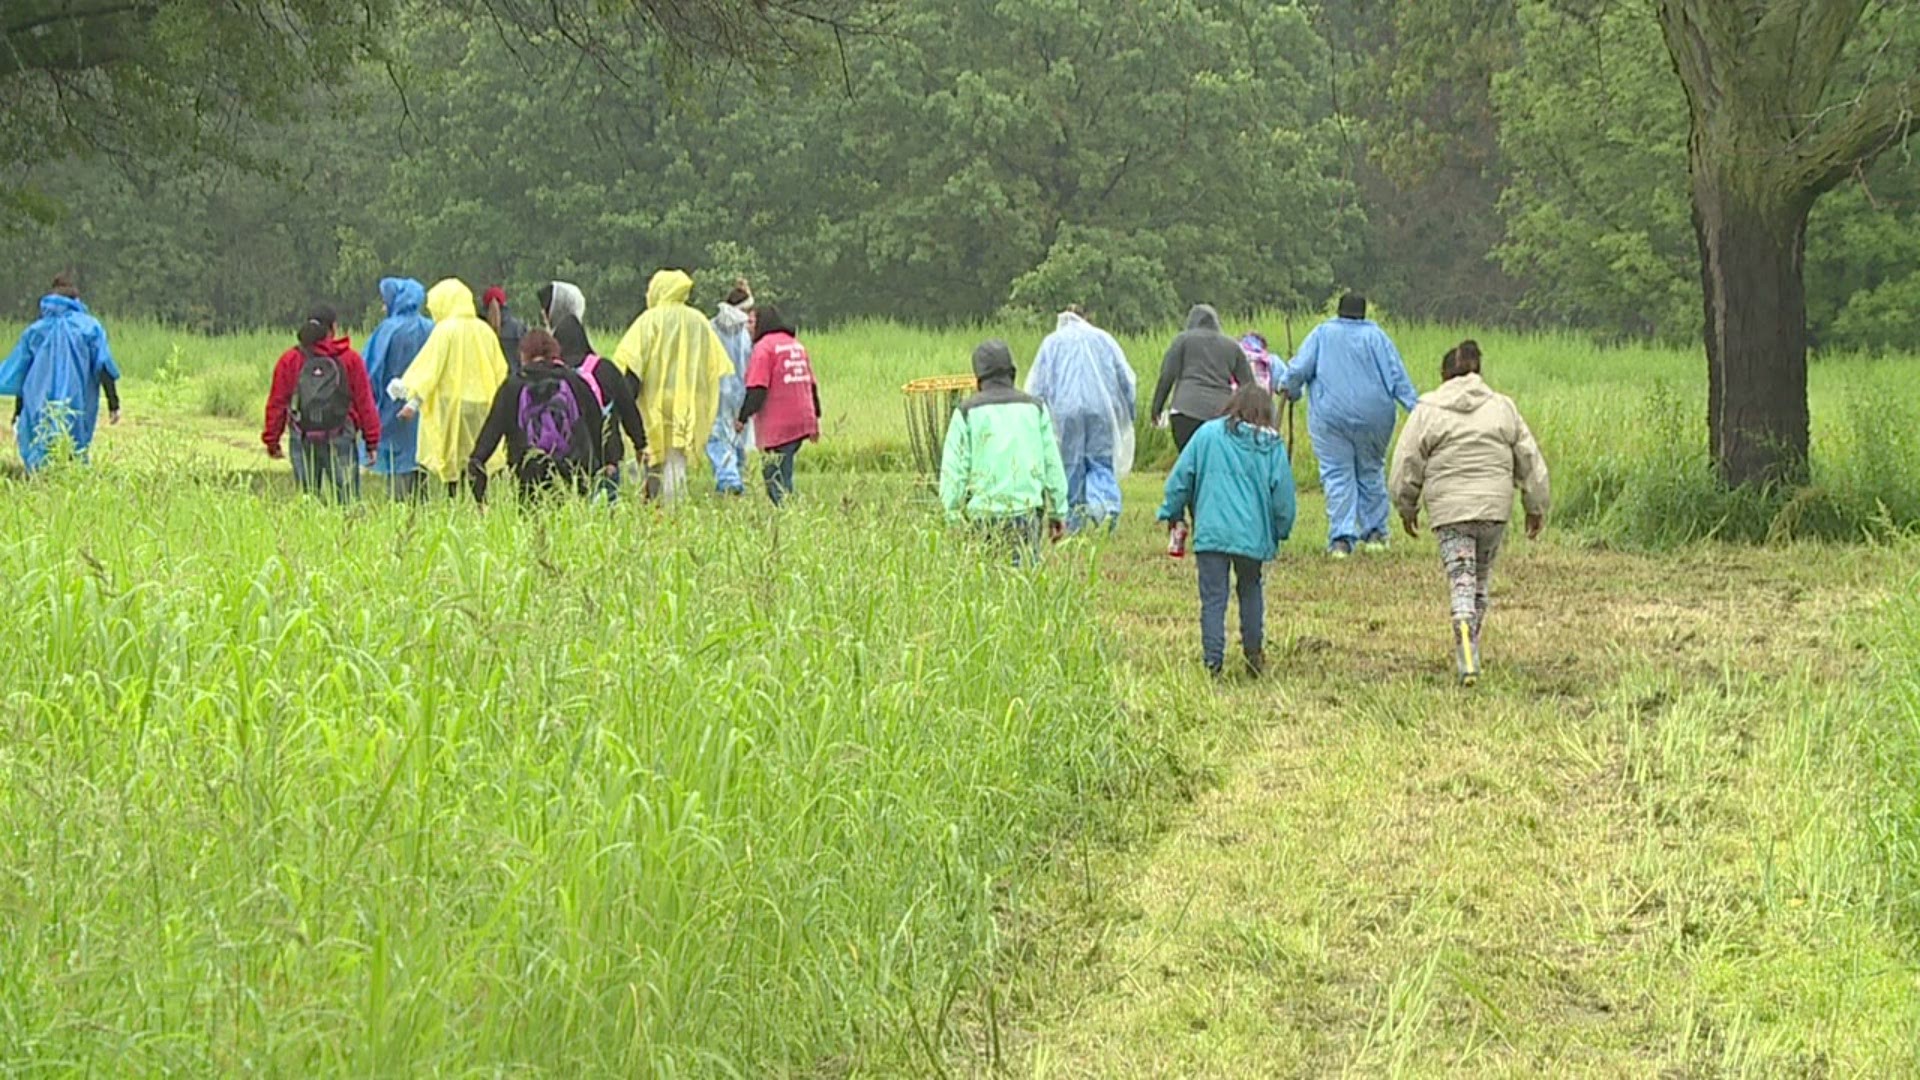 More than a dozen volunteers braved Wednesday's rain to continue the search for 10-year-old Breasia Terrell.